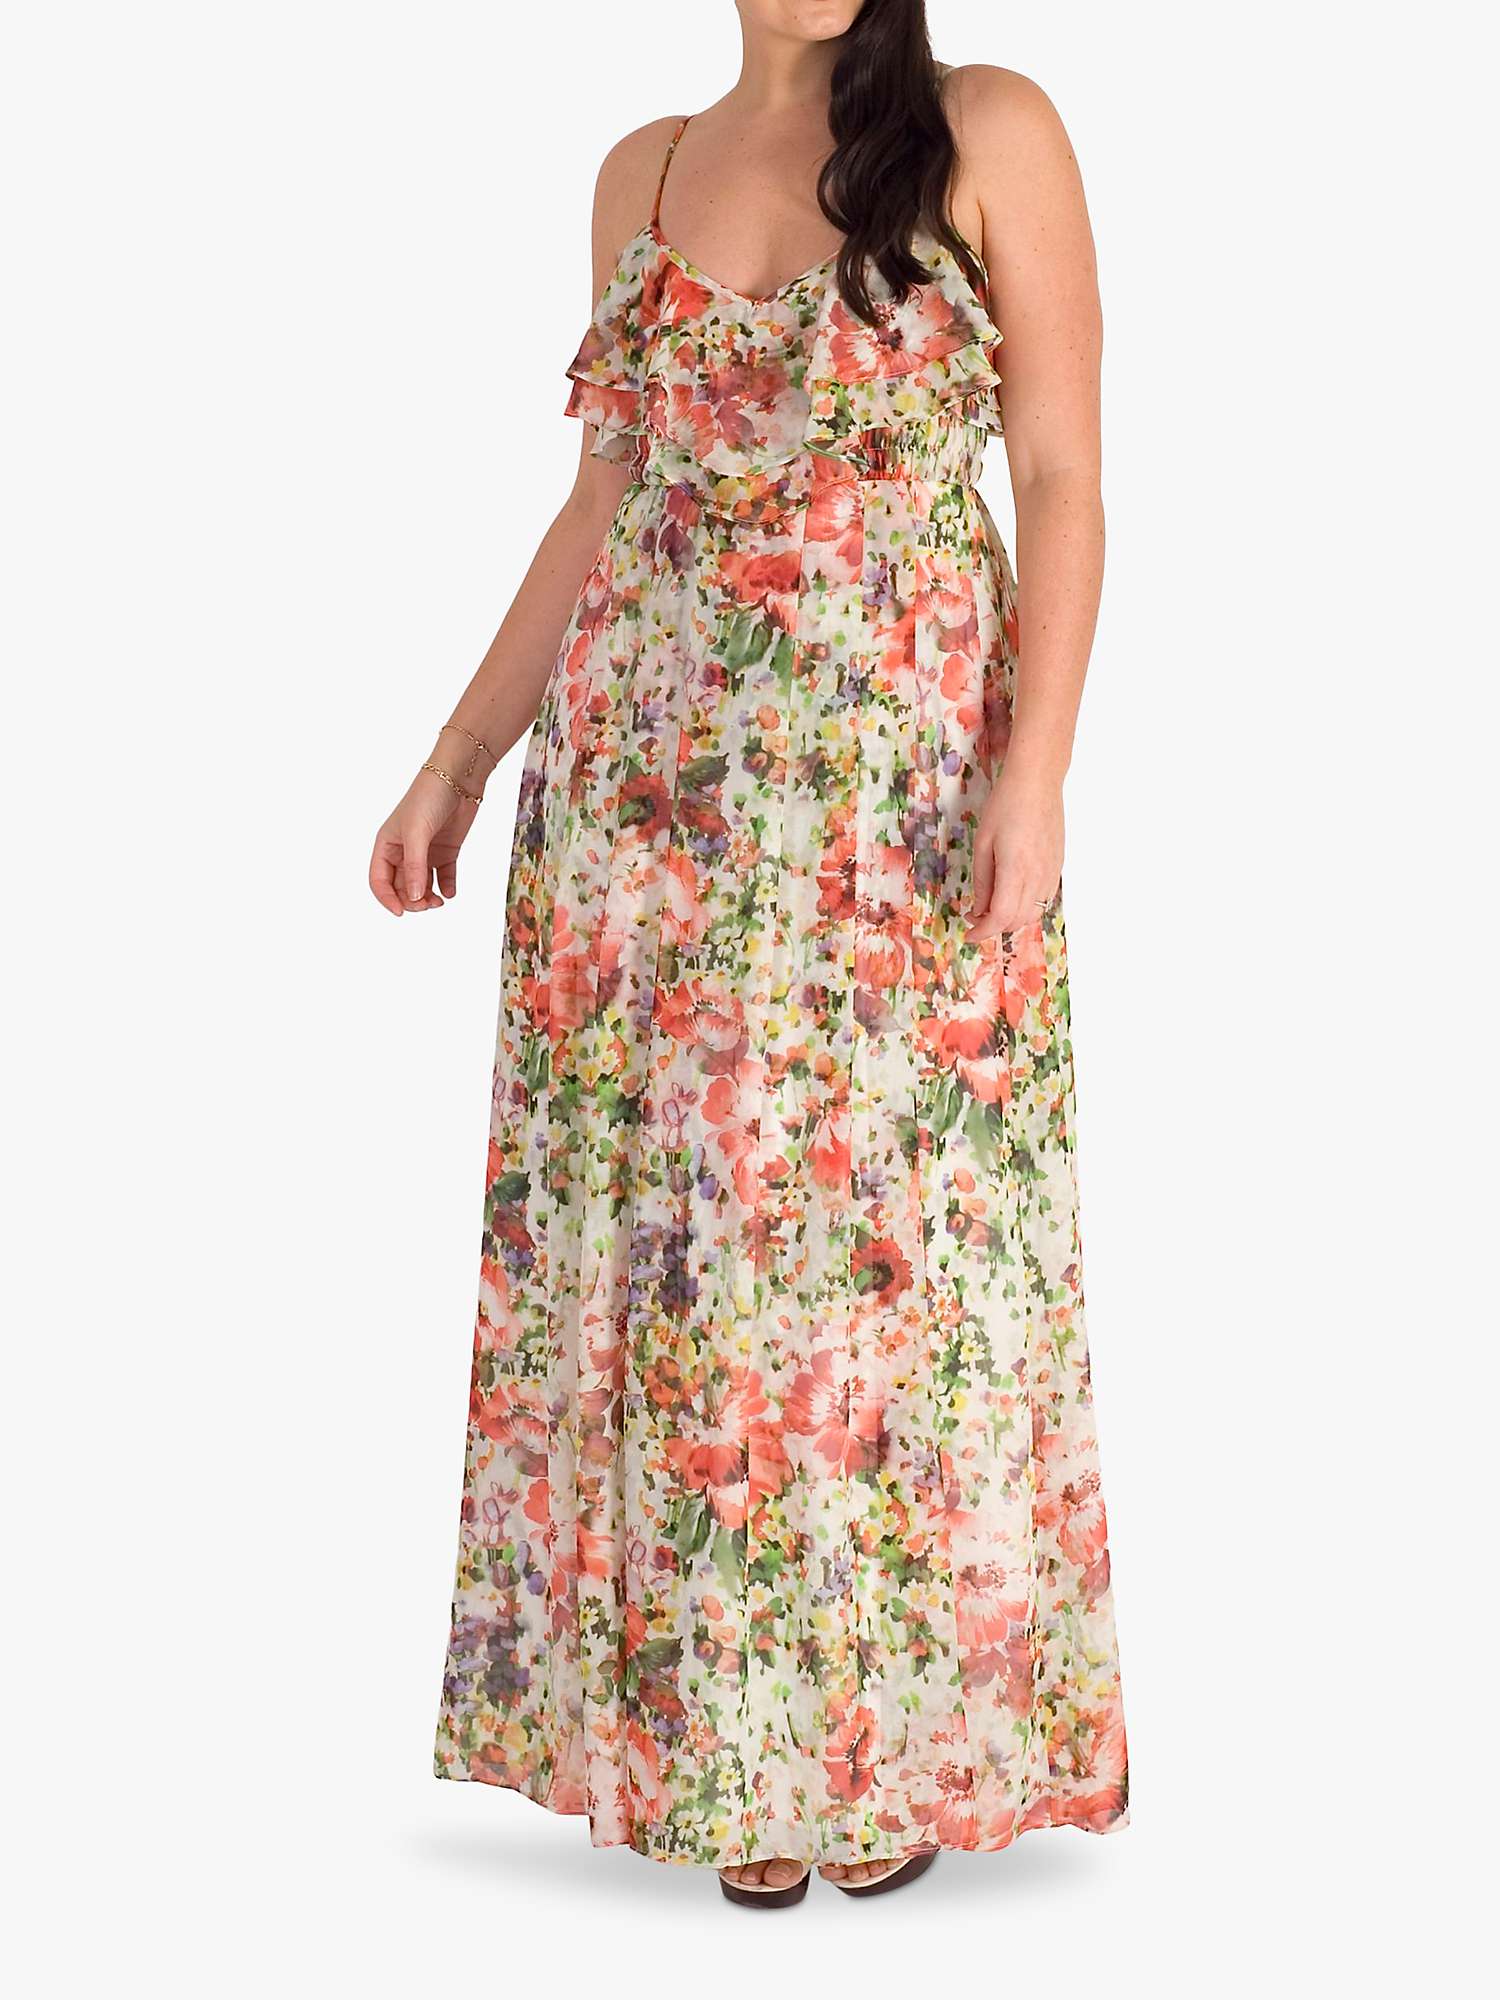 Buy chesca Floral Chiffon Maxi Dress, Multi Online at johnlewis.com